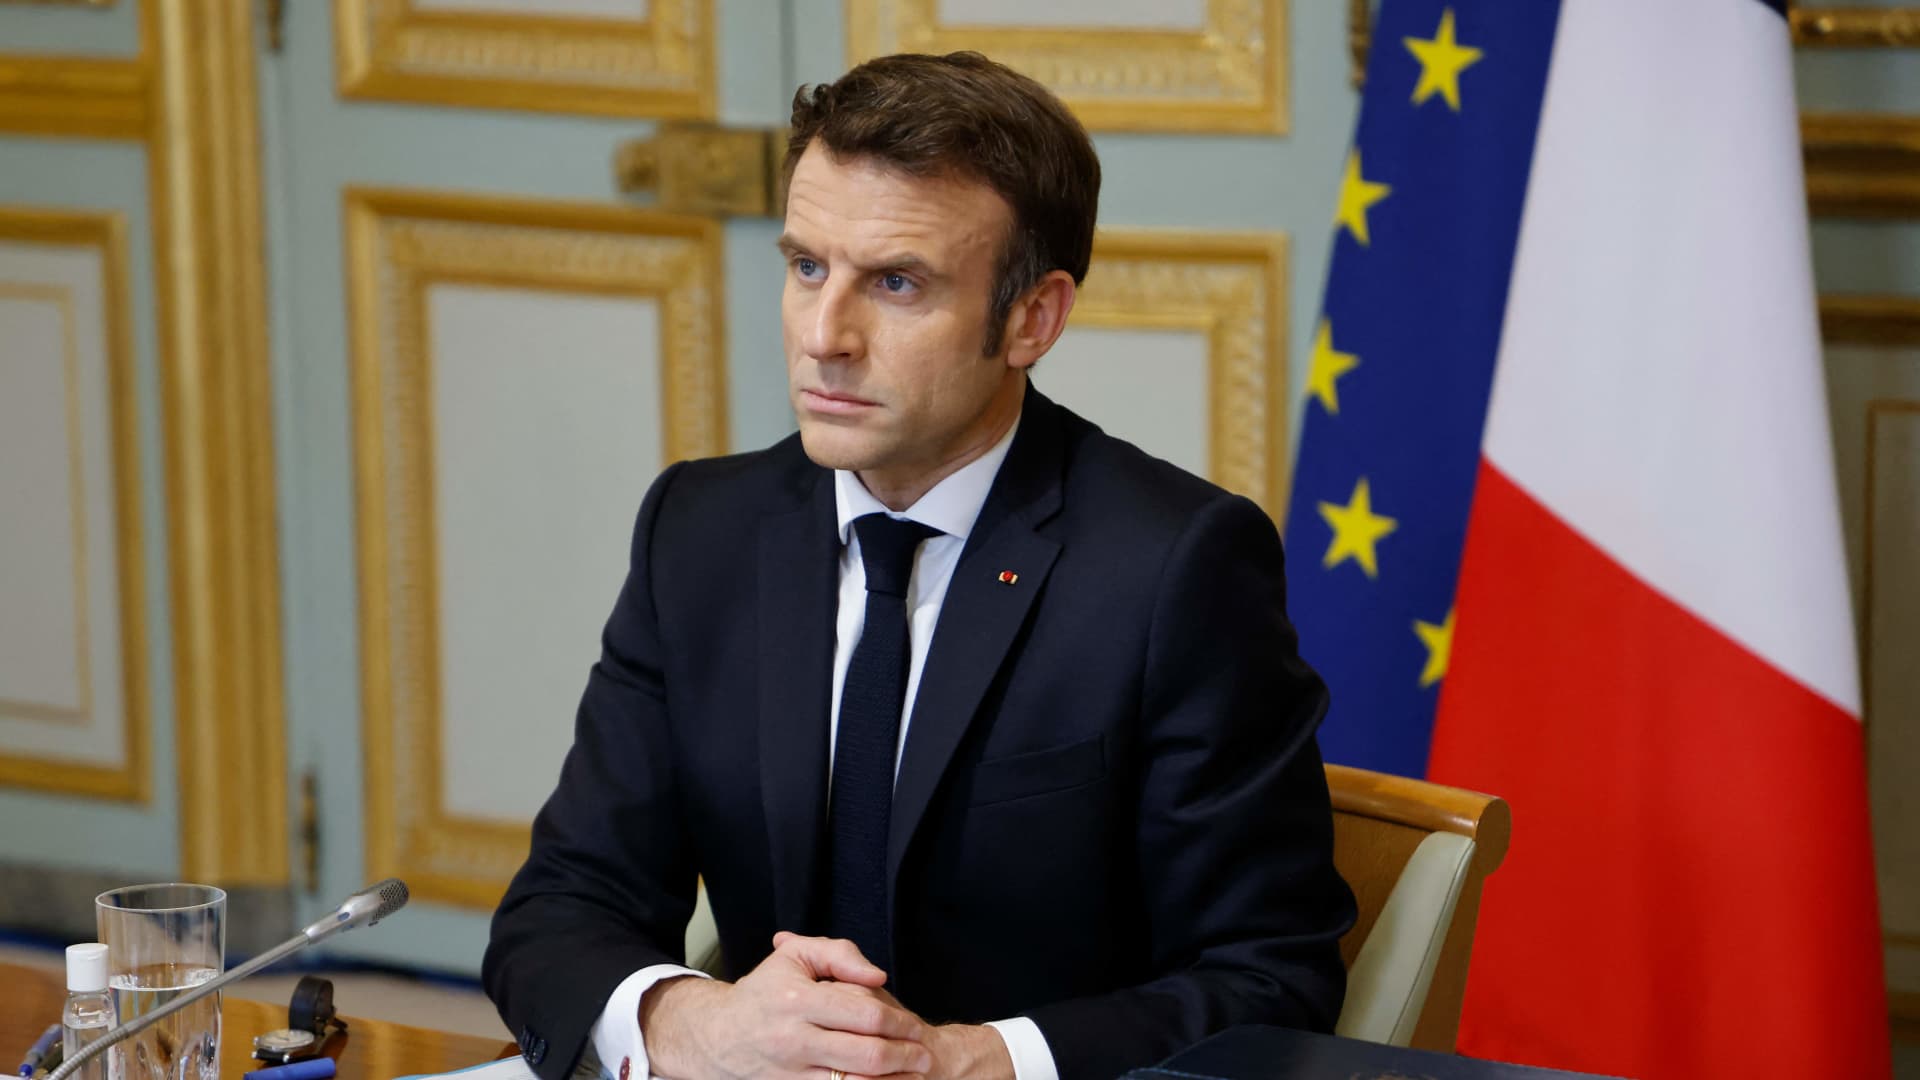 French President Emmanuel Macron takes part in a video-conference of G7 leaders on Ukraine at the Elysee Palace in Paris on February 24, 2022.